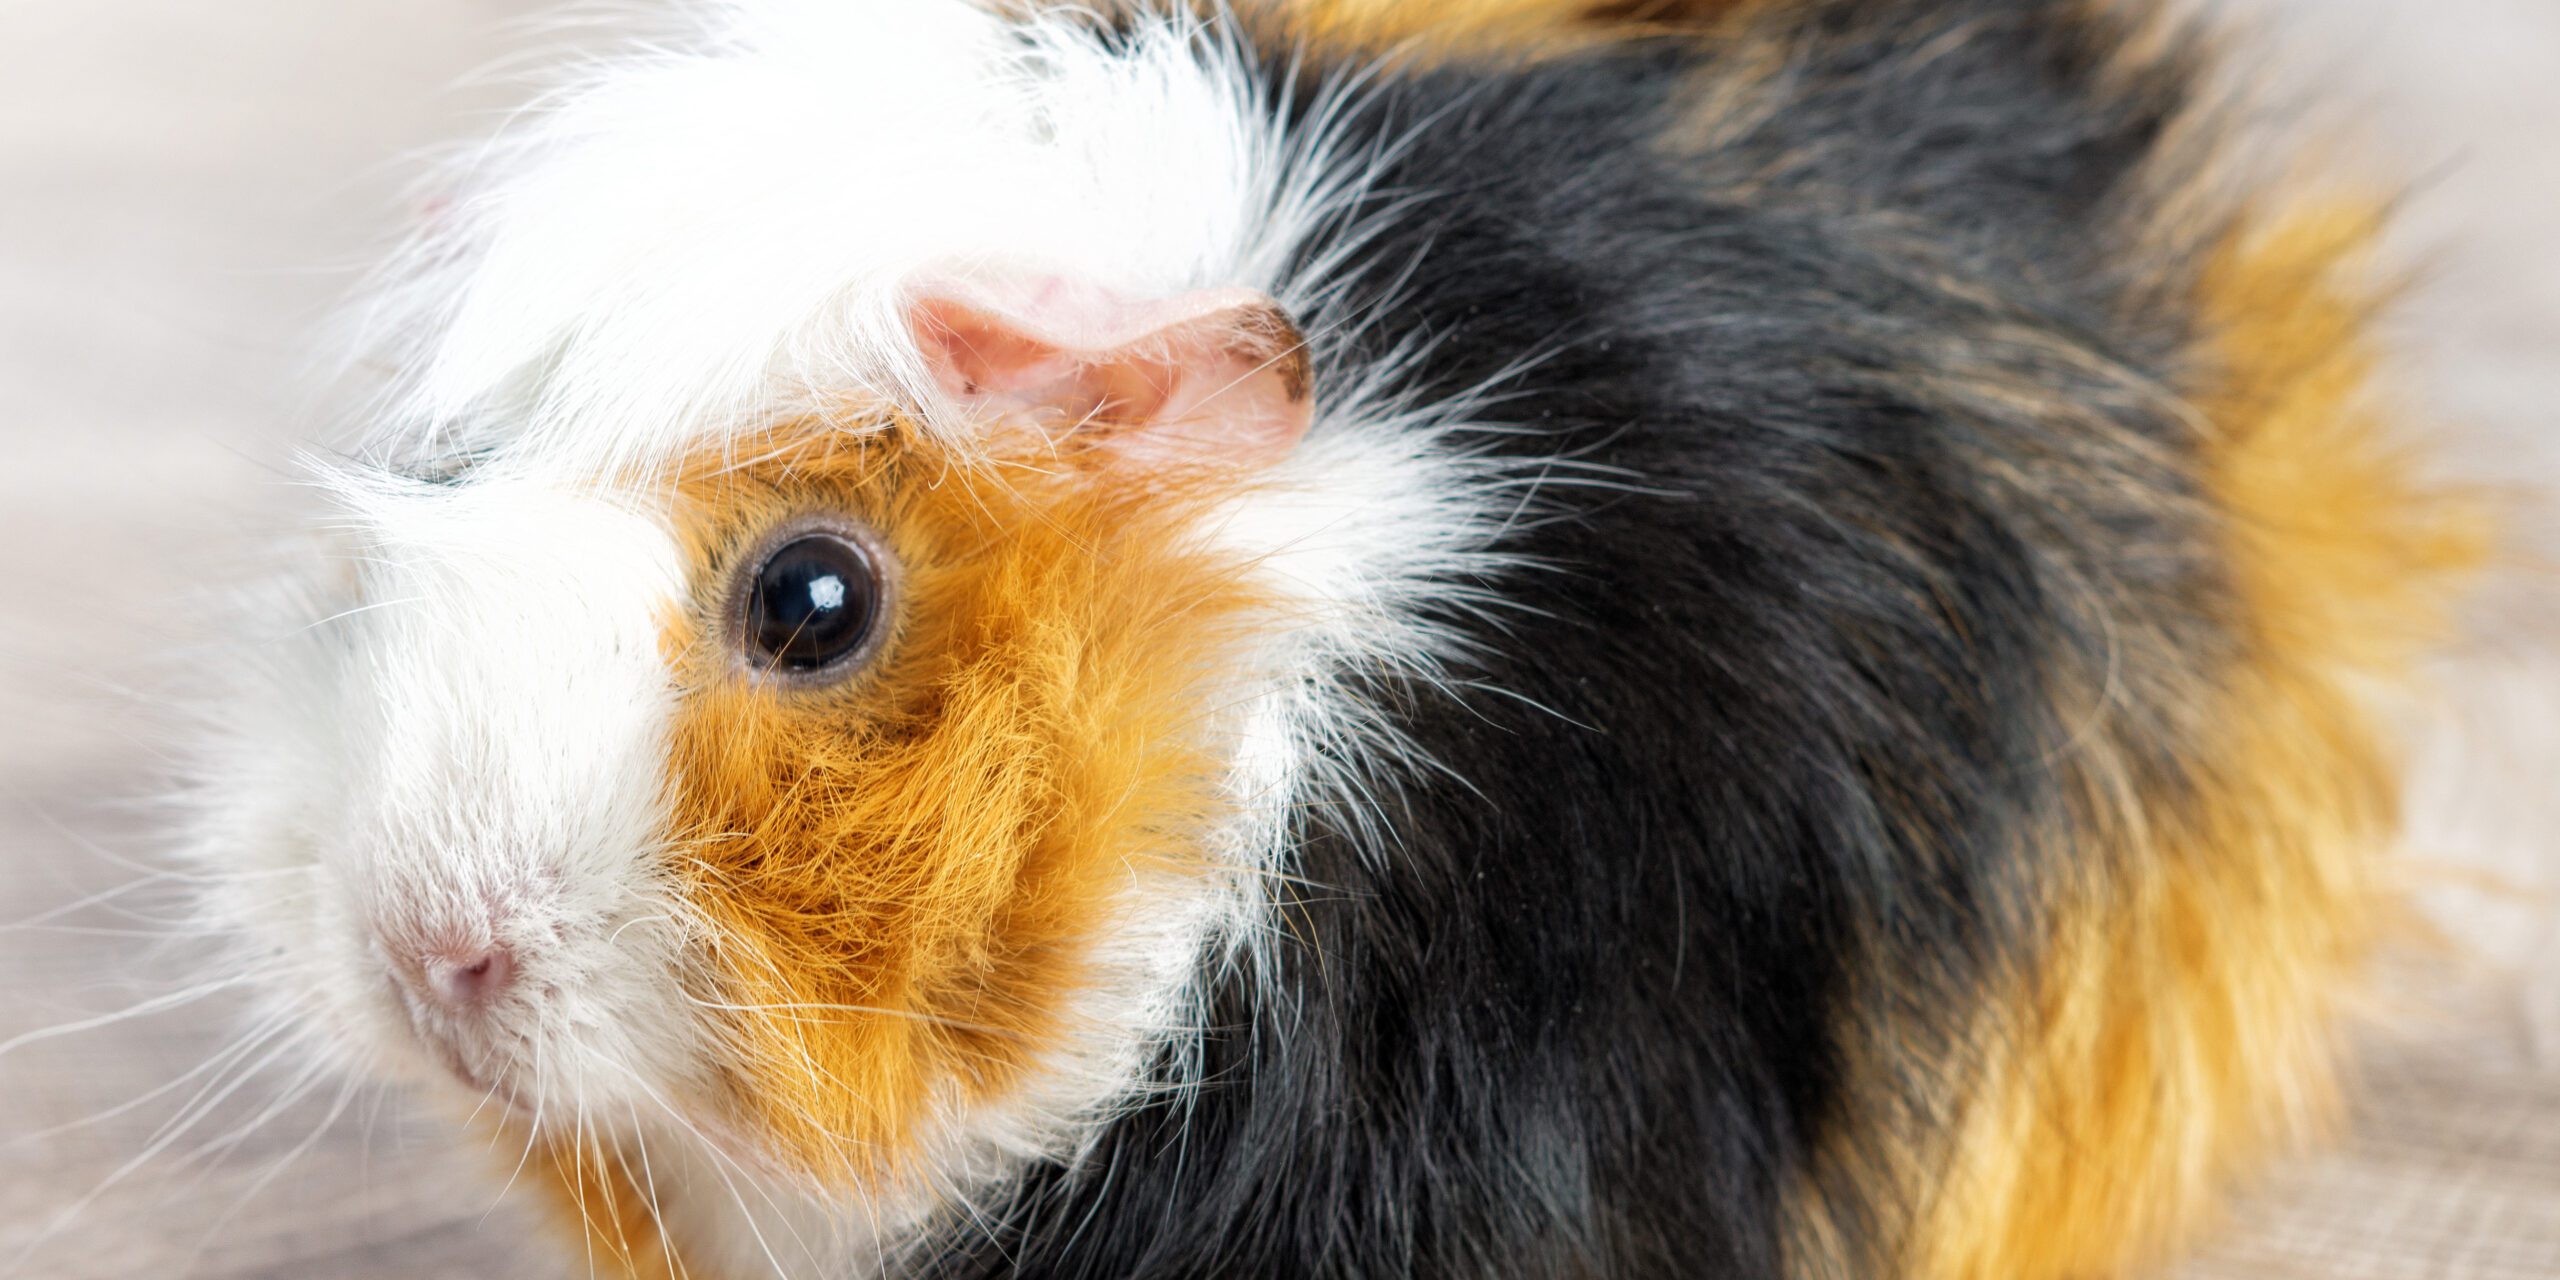 Young guinea pig in a home setting